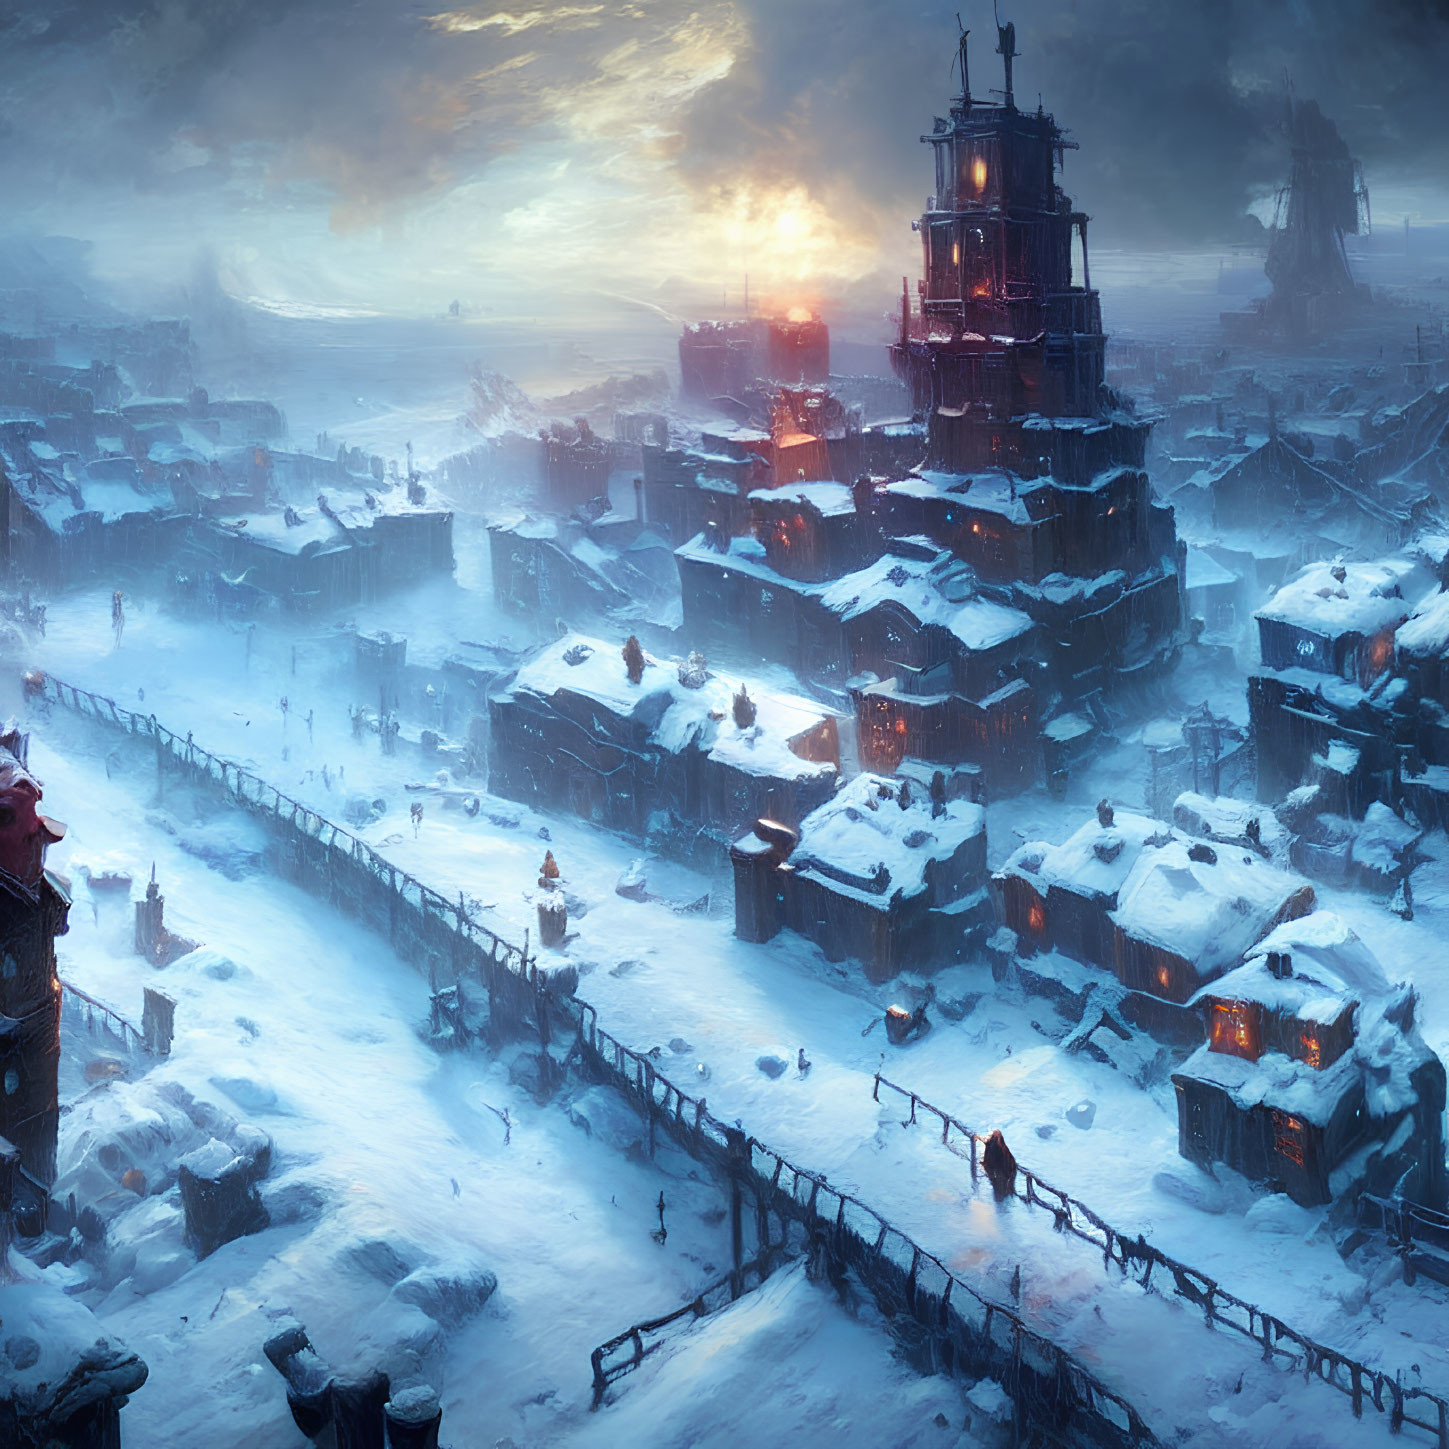 Snow-covered industrial cityscape at sunset with towering central structure and icy landscape under cloudy sky.